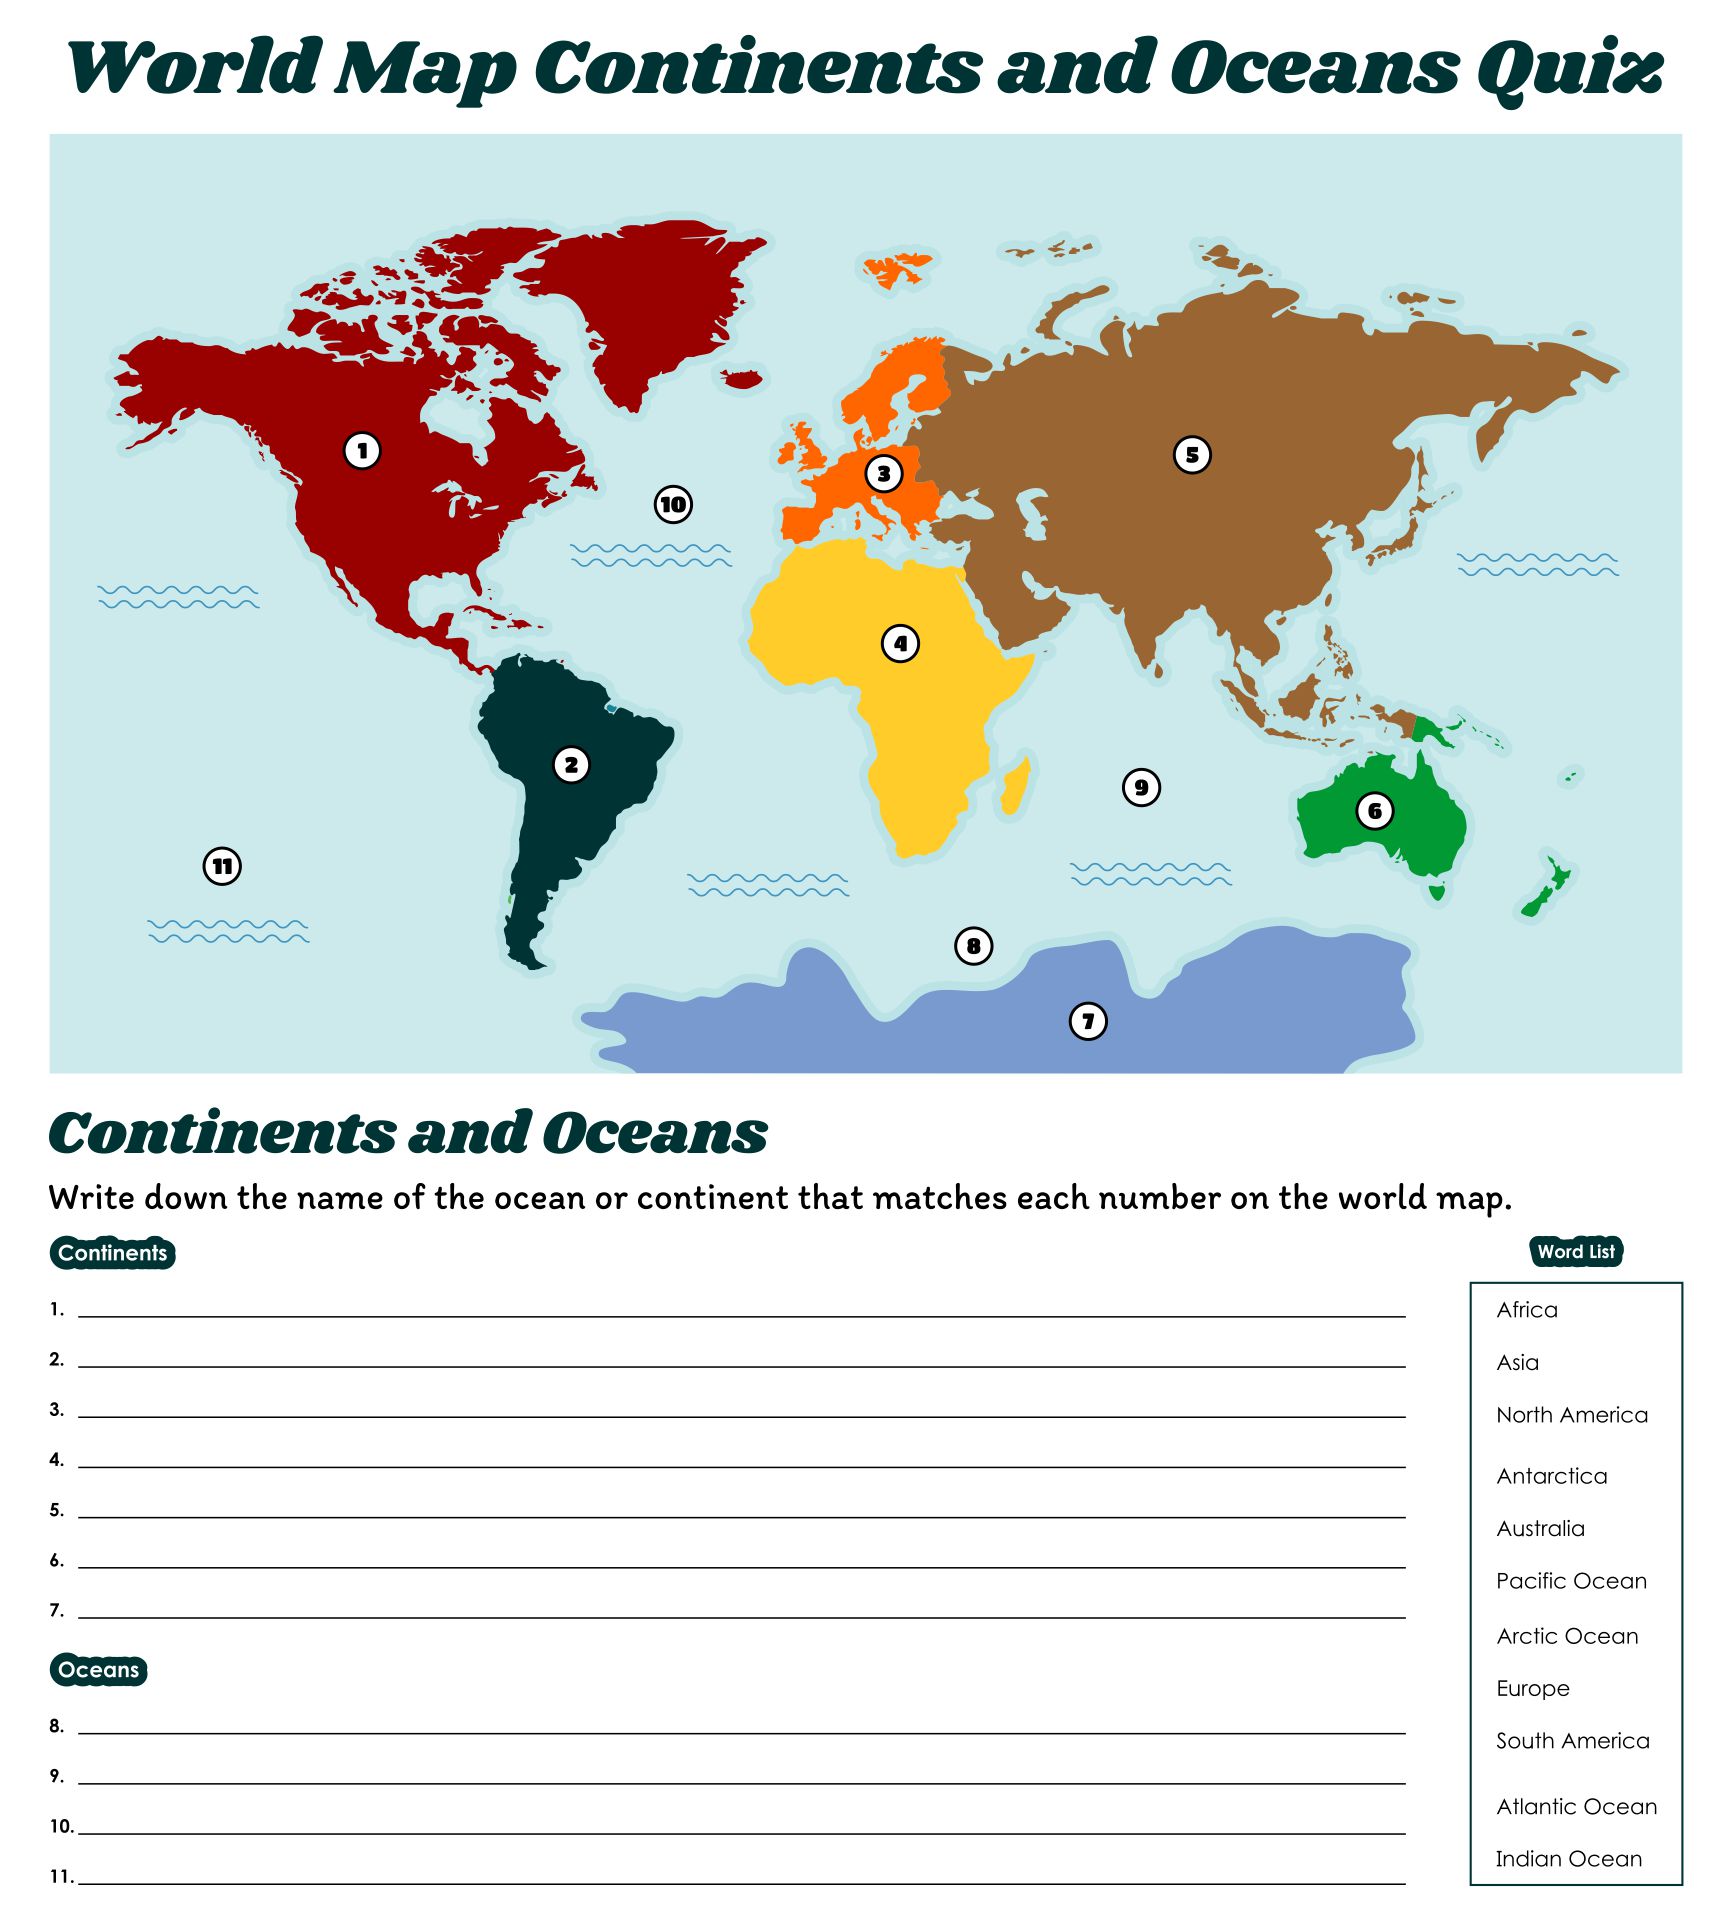 World Map Continents And Oceans Quiz Continents And Oceans World Map